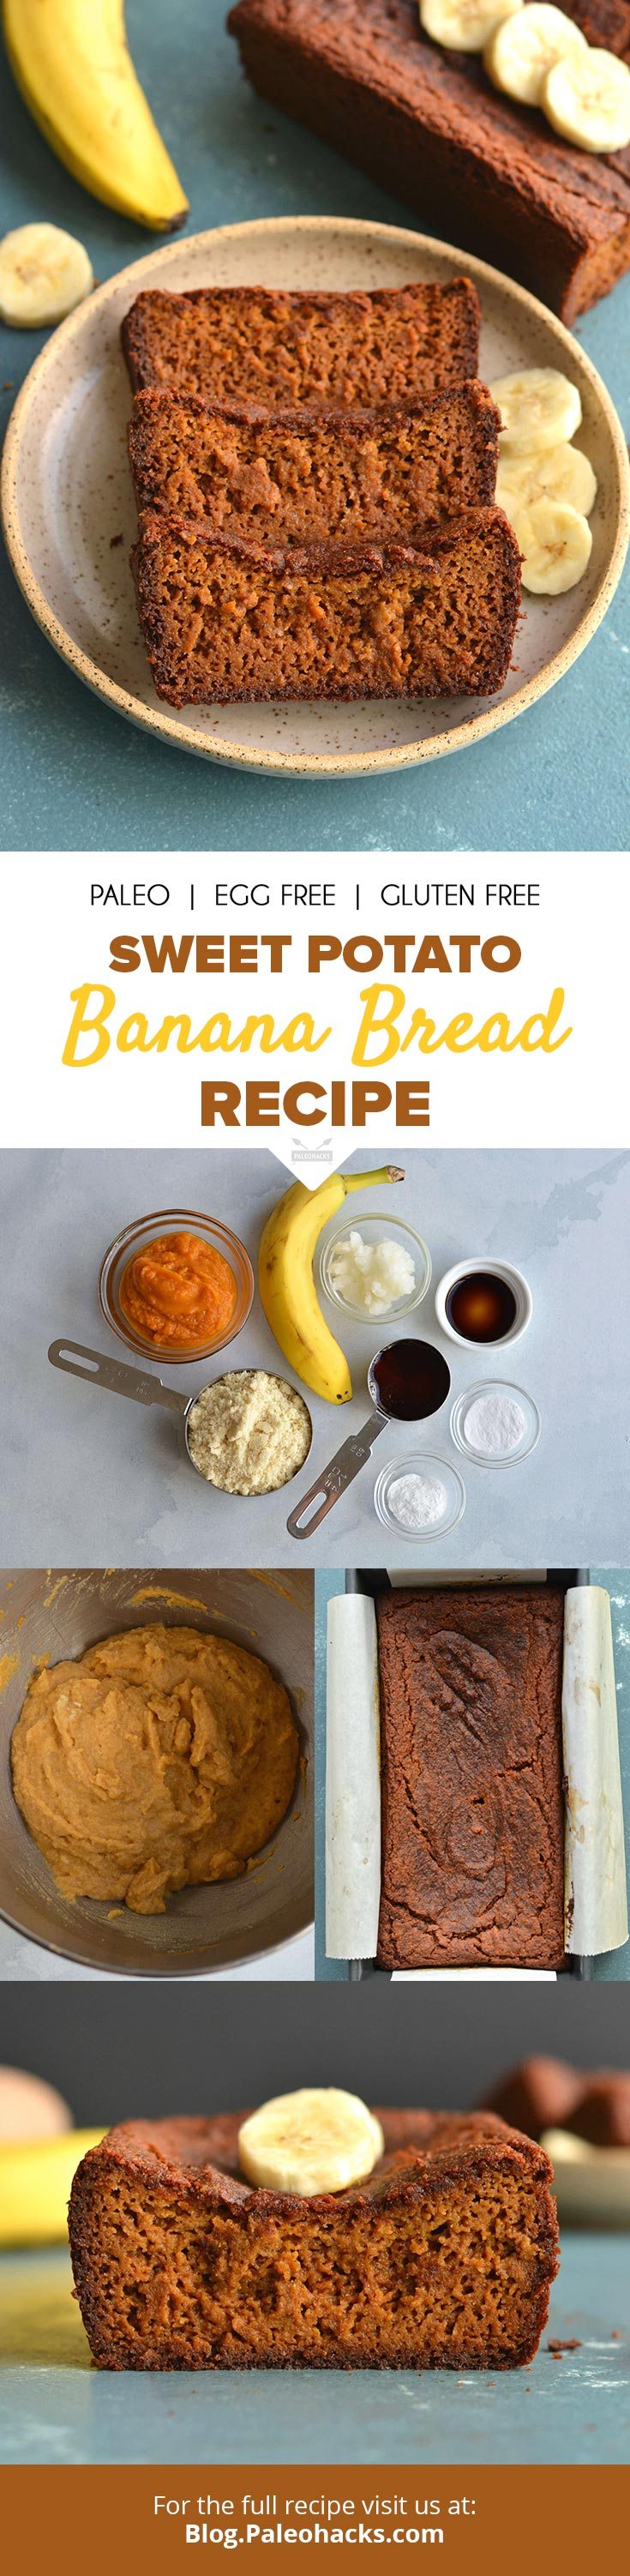 Use up leftover bananas in this gluten-free Sweet Potato Banana Bread recipe! There’s nothing like a freshly baked slice of banana bread.